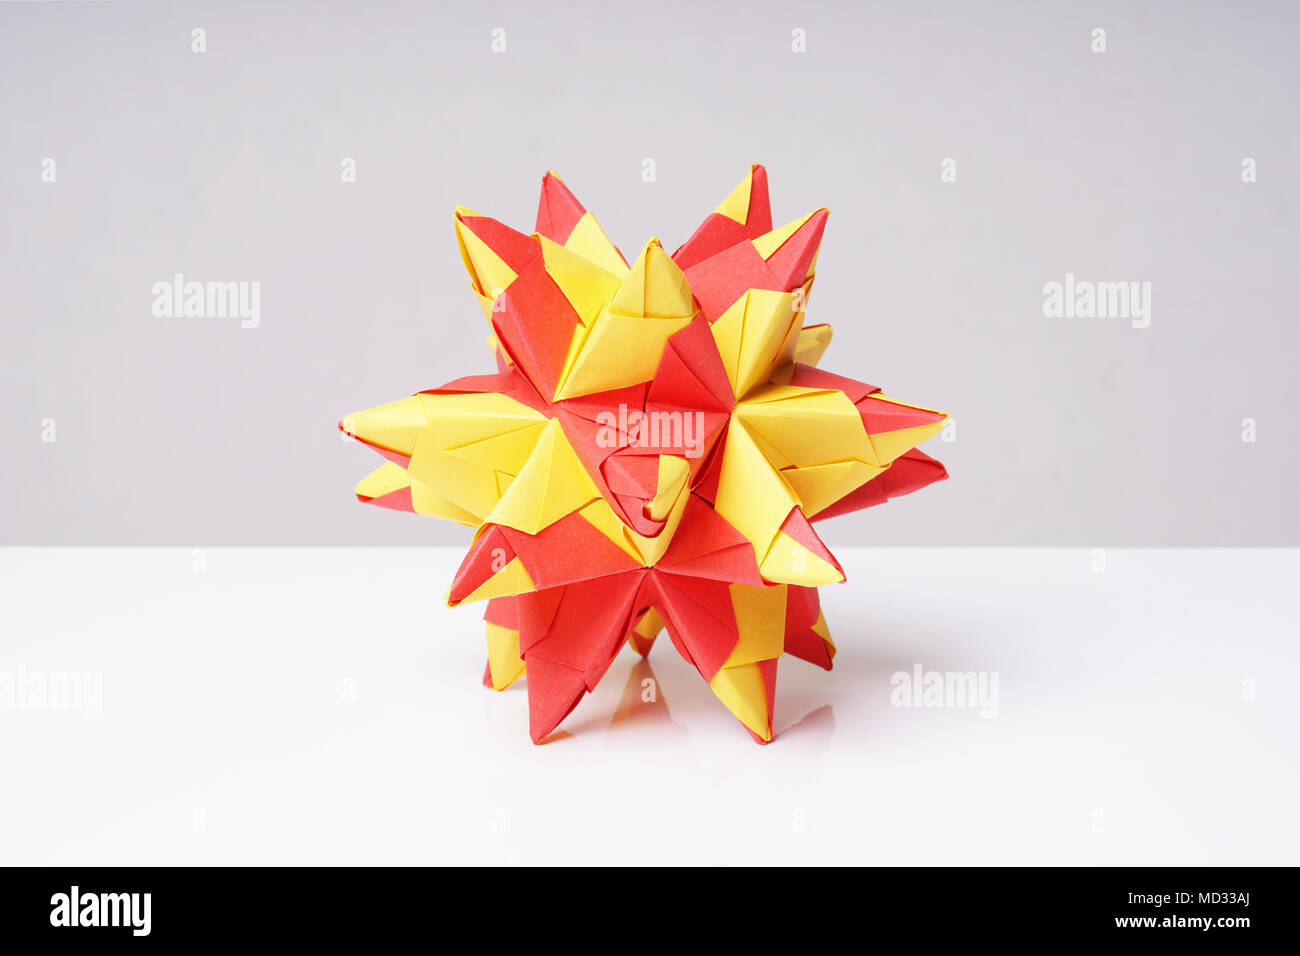 papercraft or paper craft star Stock Photo